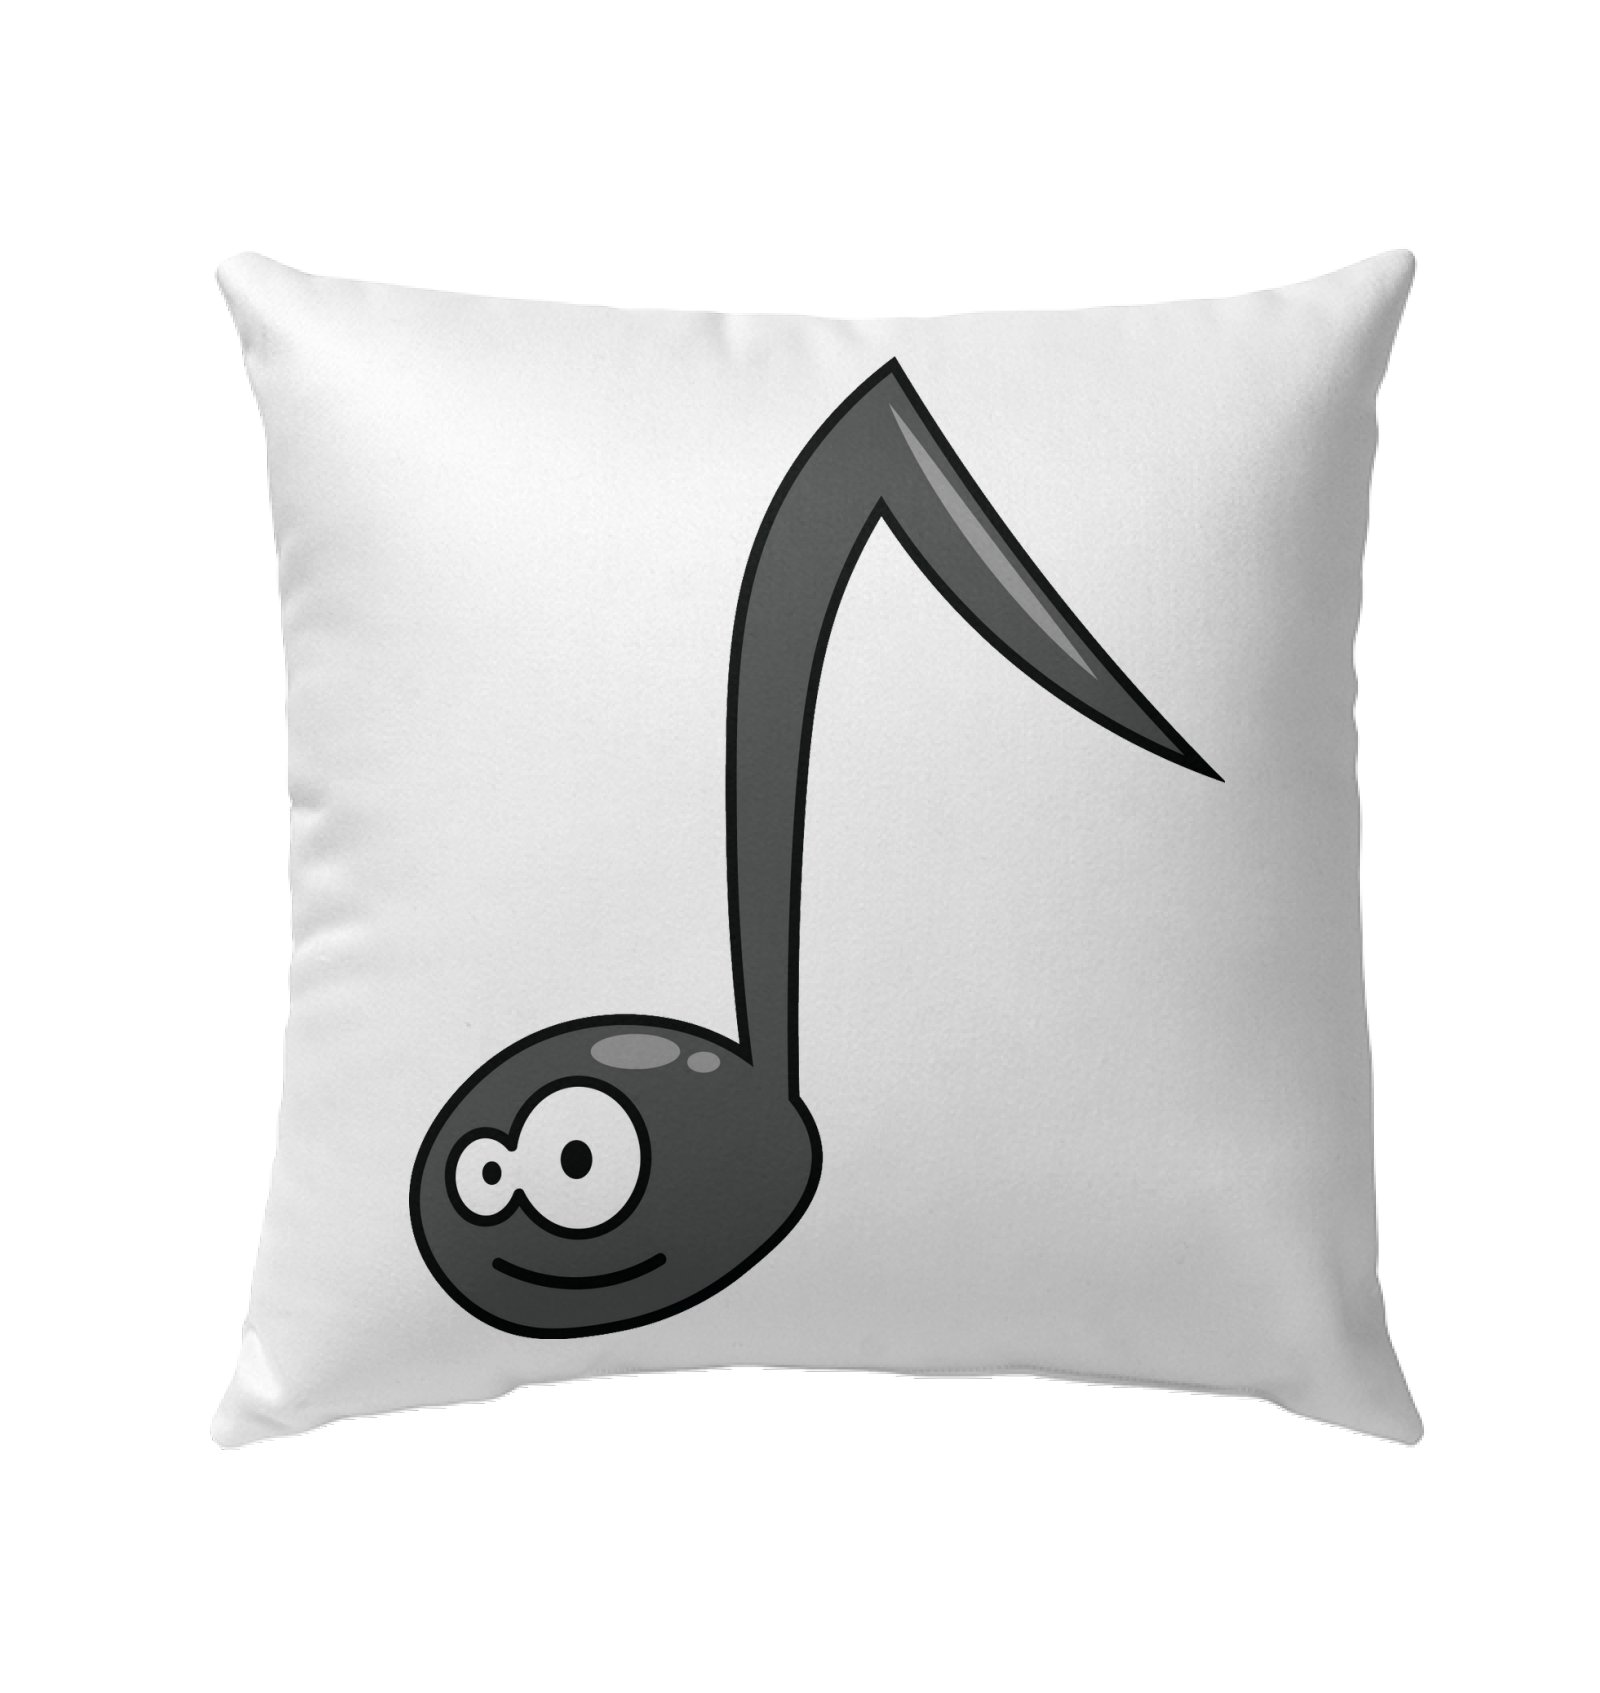 Curious Note - Outdoor Pillow